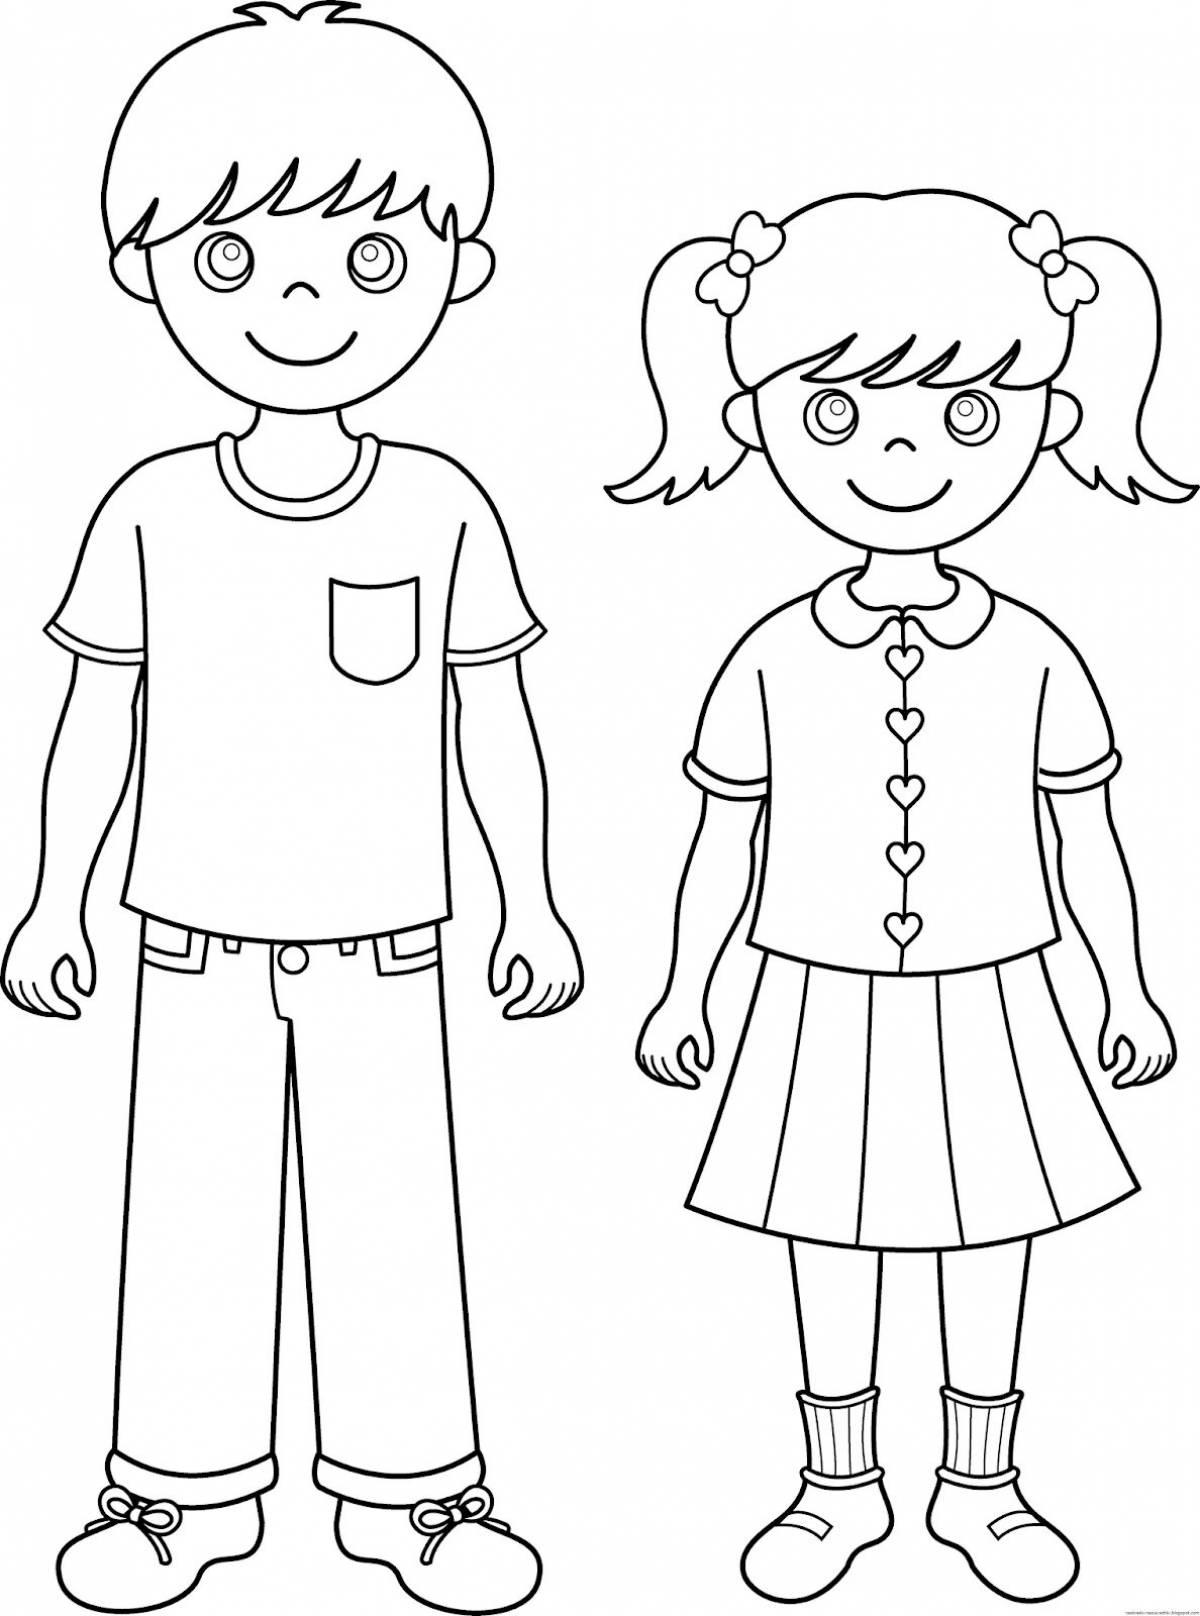 Exciting brother and sister coloring book